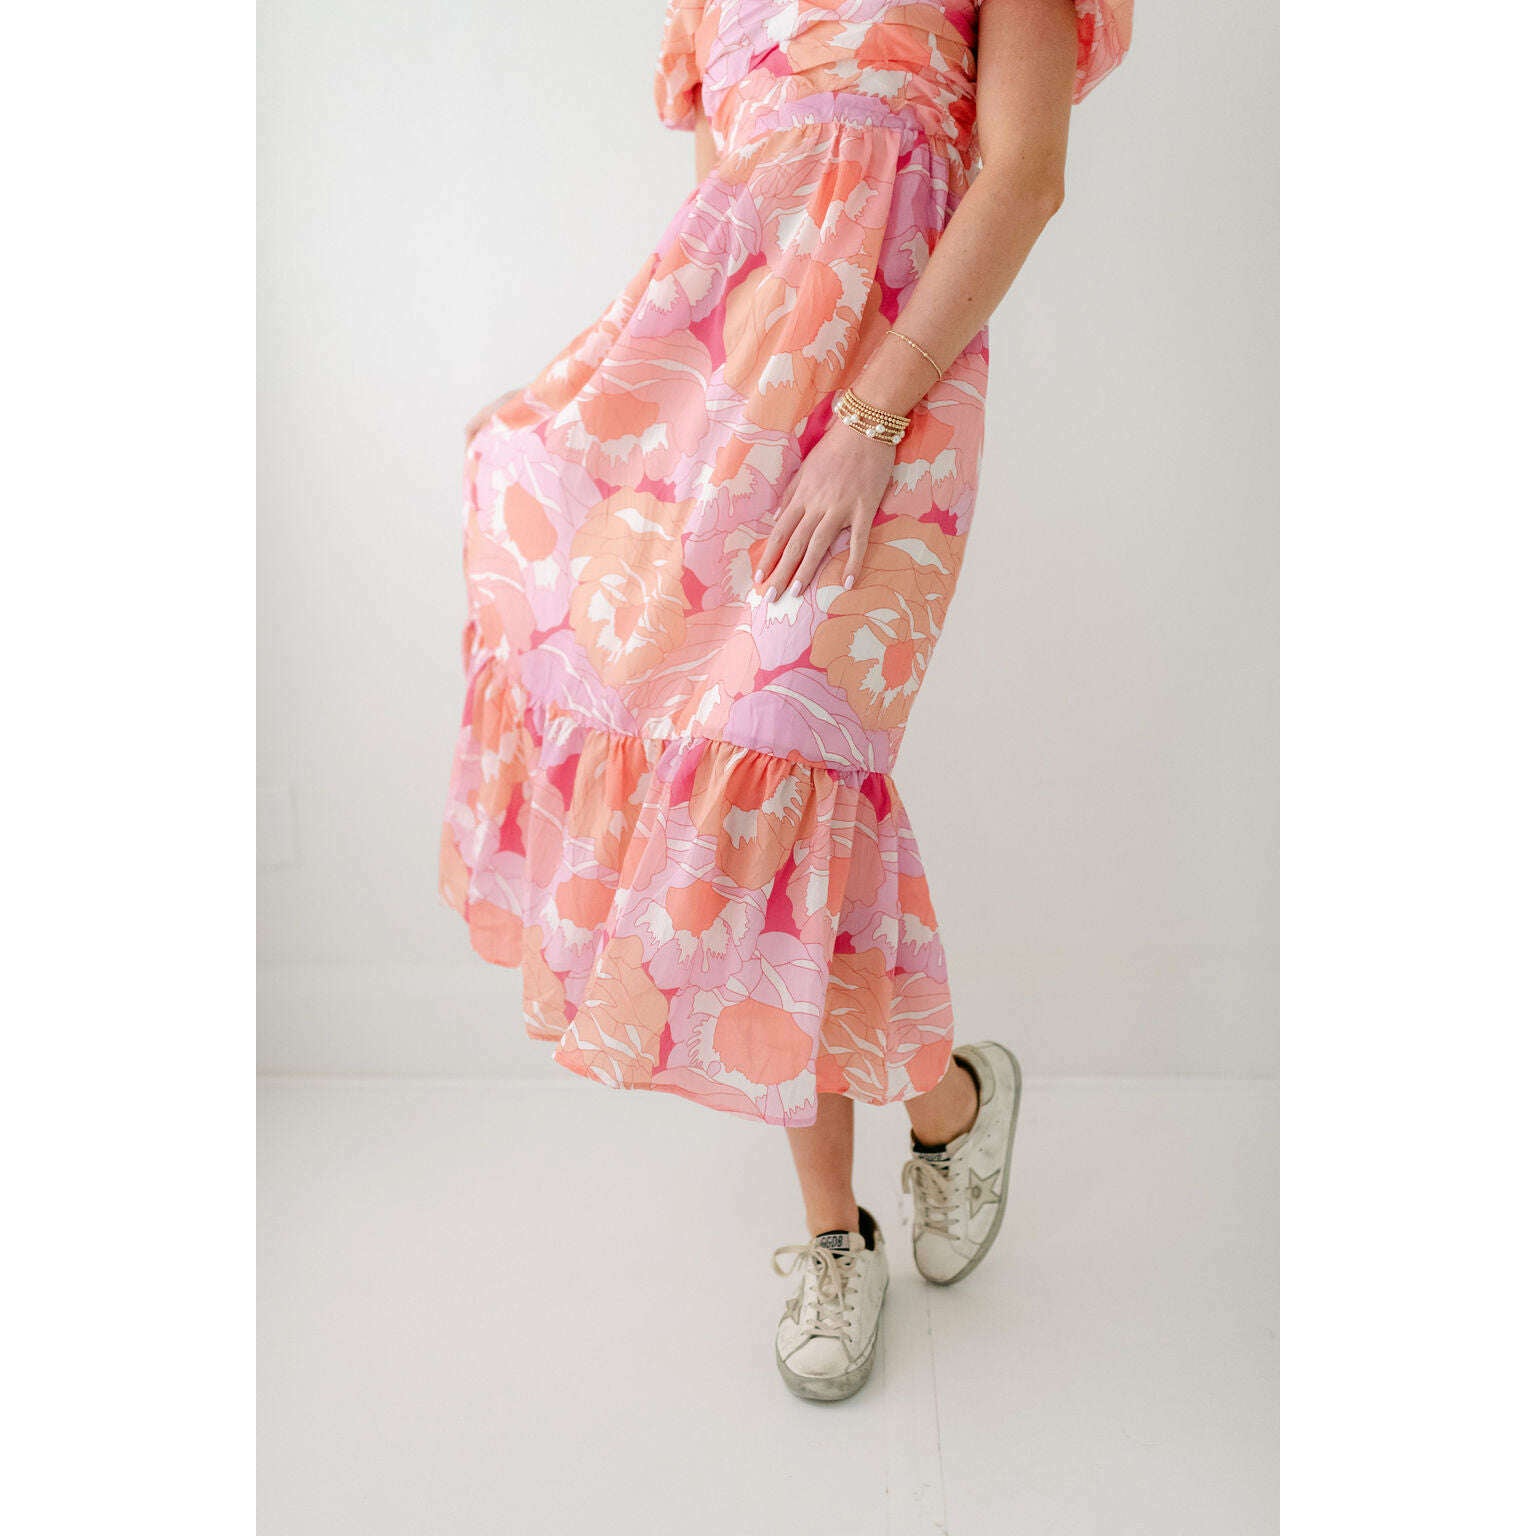 8.28 Boutique:8.28 Boutique,The Xander Dress in Pink Party Floral,Dress